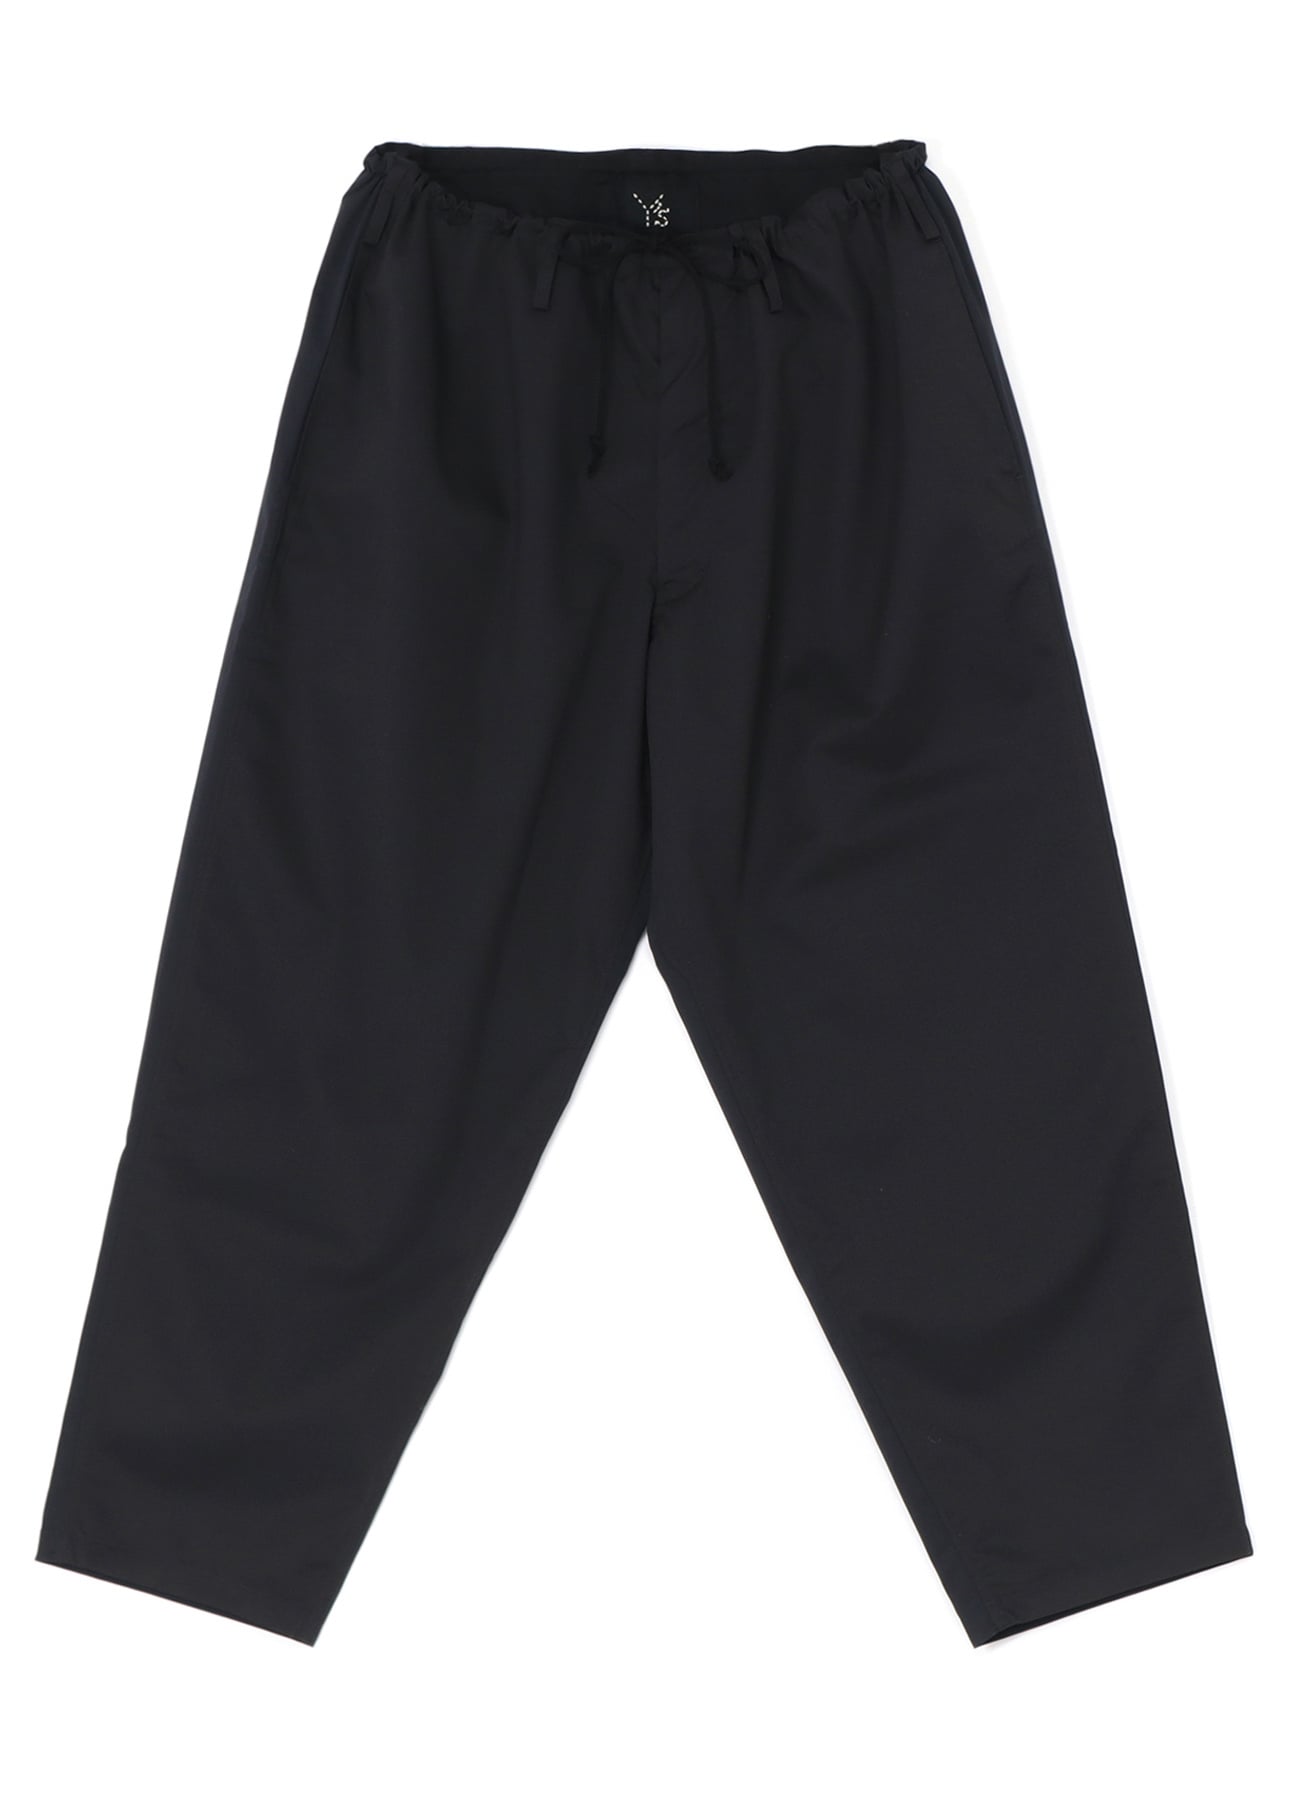 STRETCHY POLYESTER/RAYON TWILL DRAWSTRING PANTS(S Black): Y's｜THE 